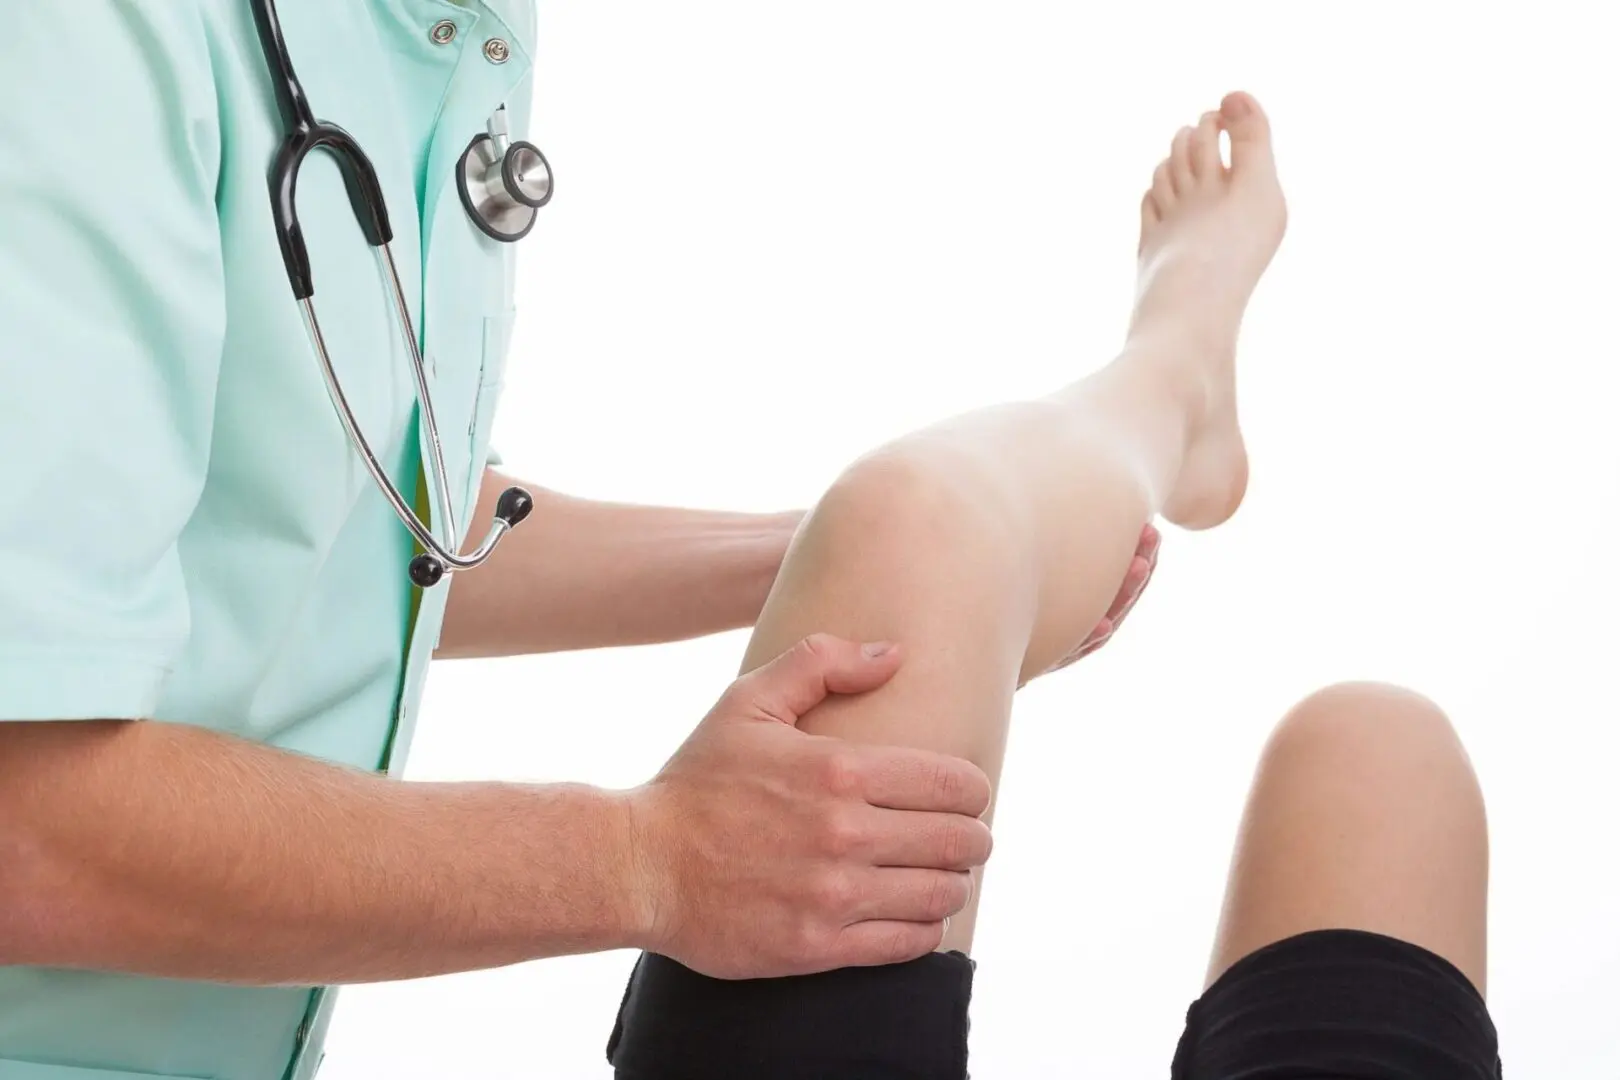 A doctor is examining the leg of a person.